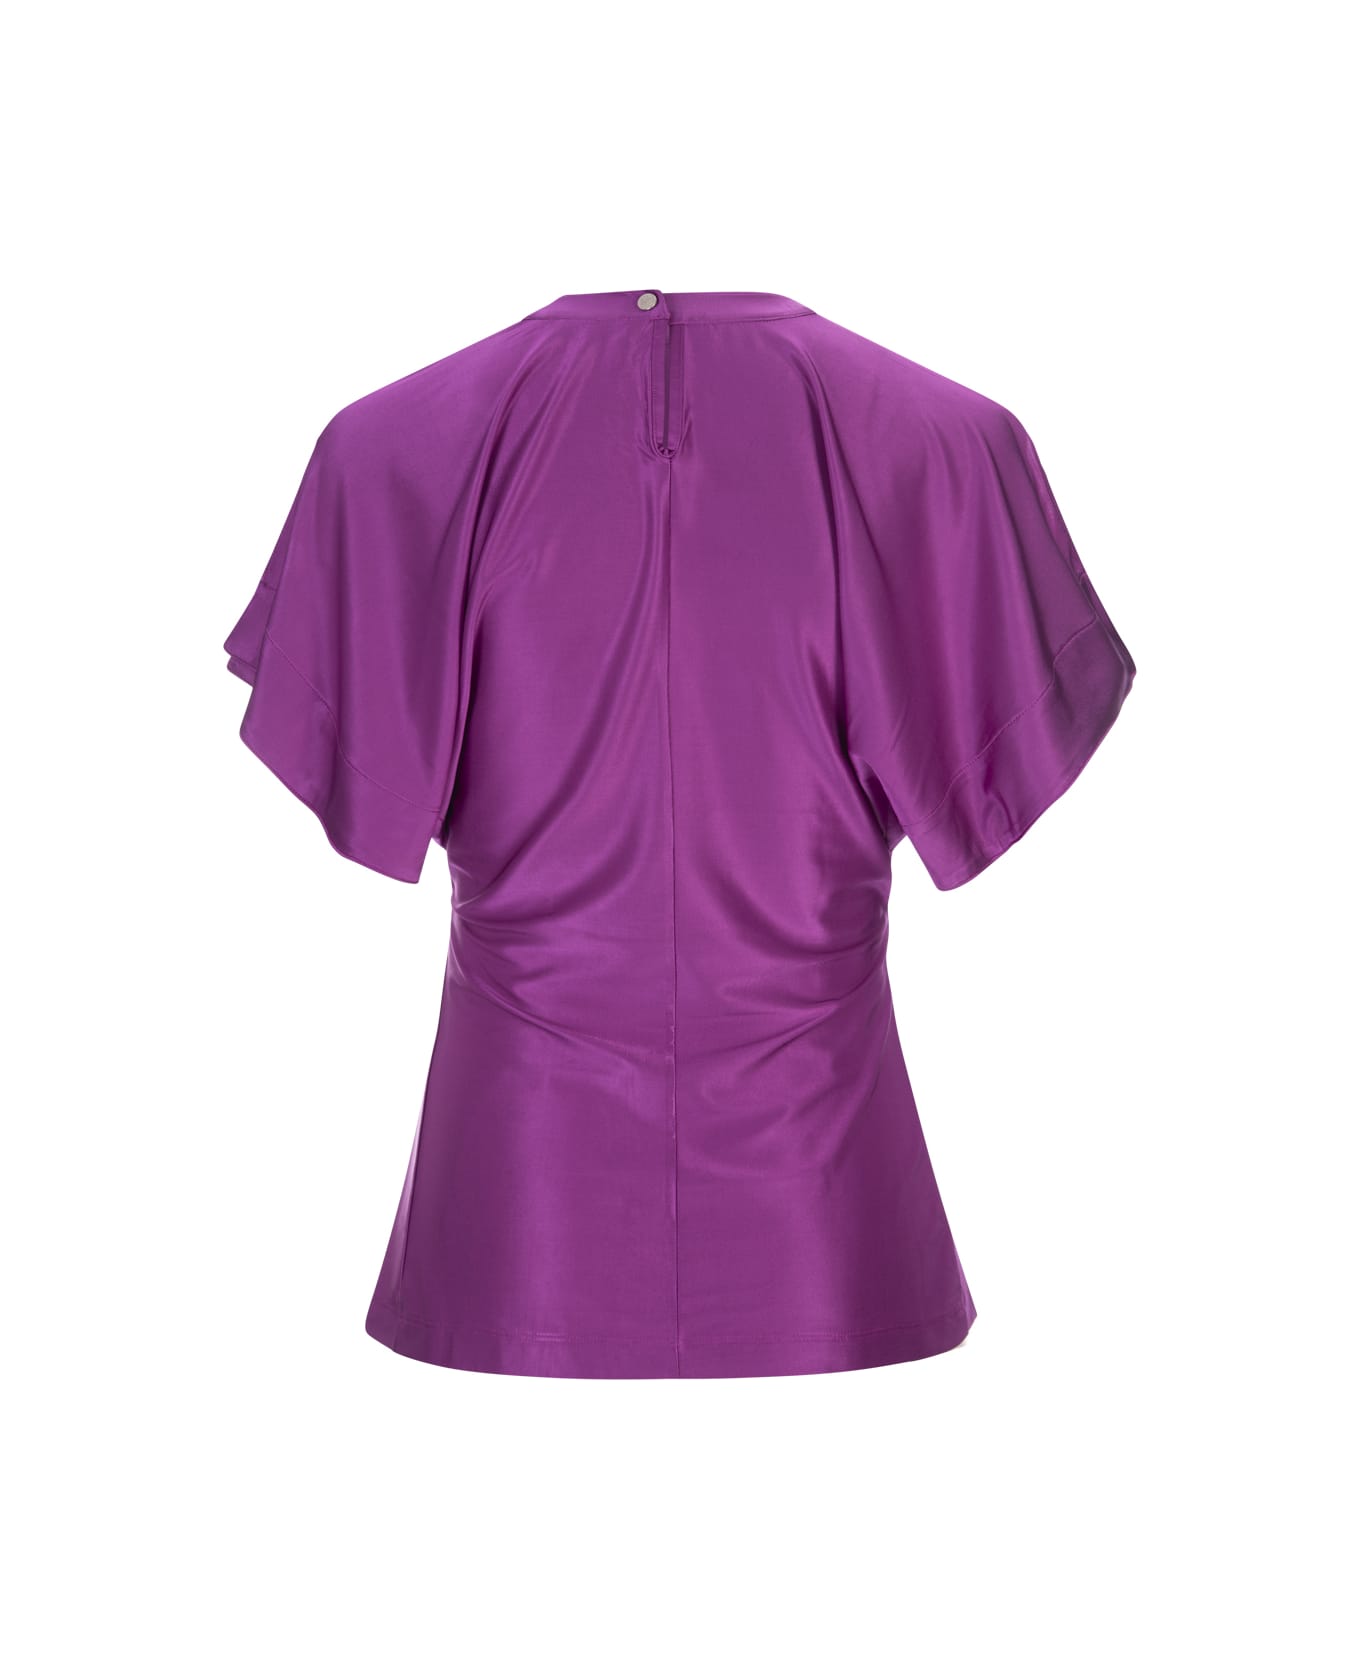 Paco Rabanne Purple Top With Draping And Buttons